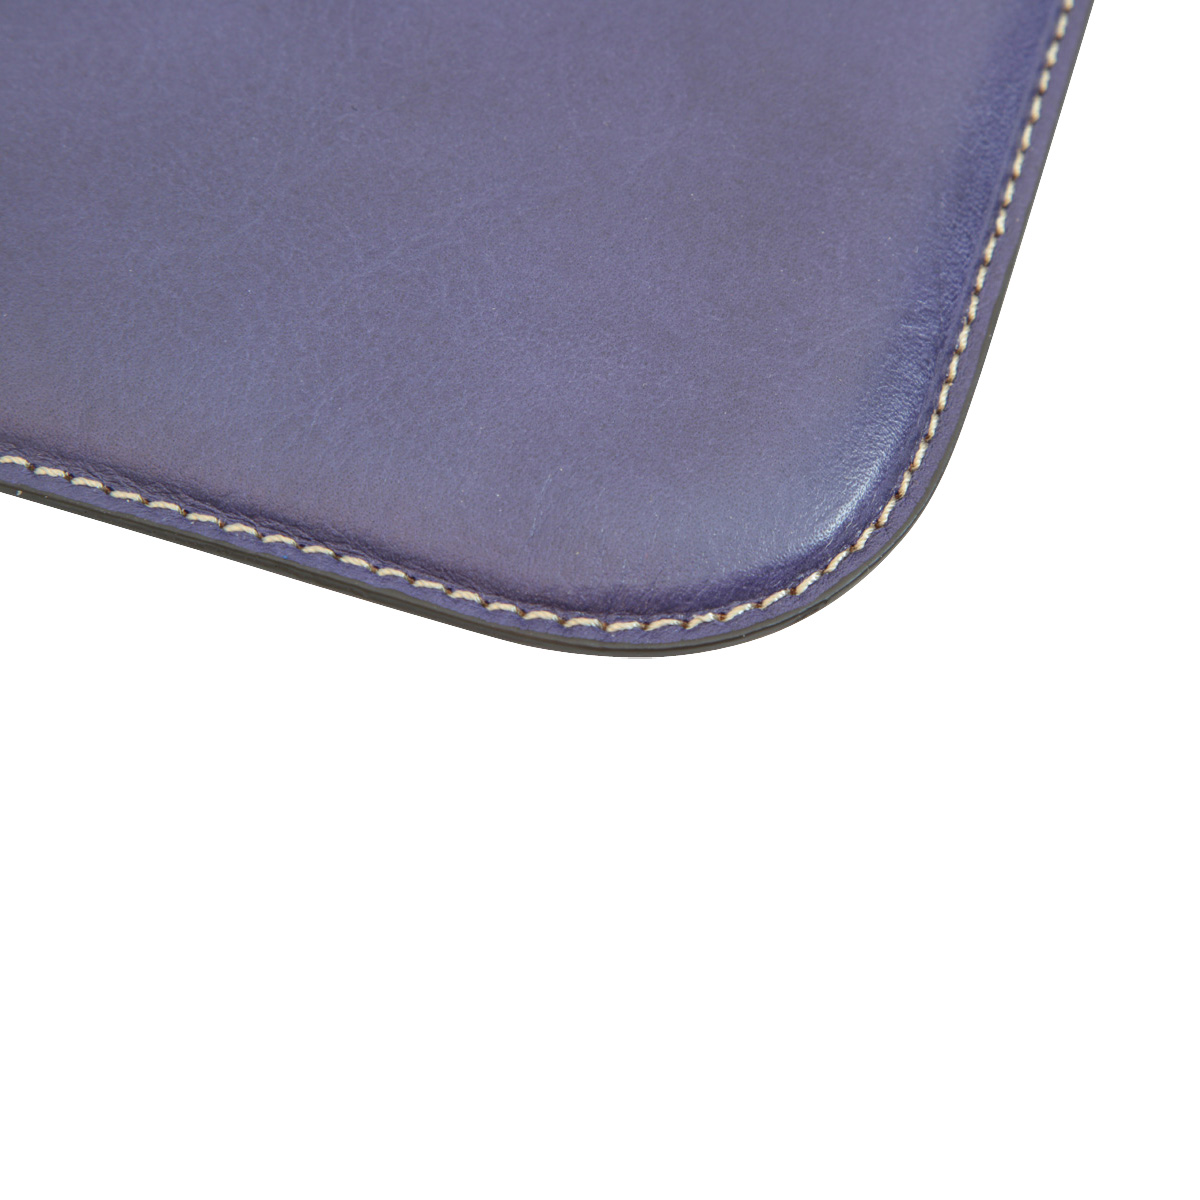 Leather desk pad  | 760089CB | EURO | Old Angler Firenze